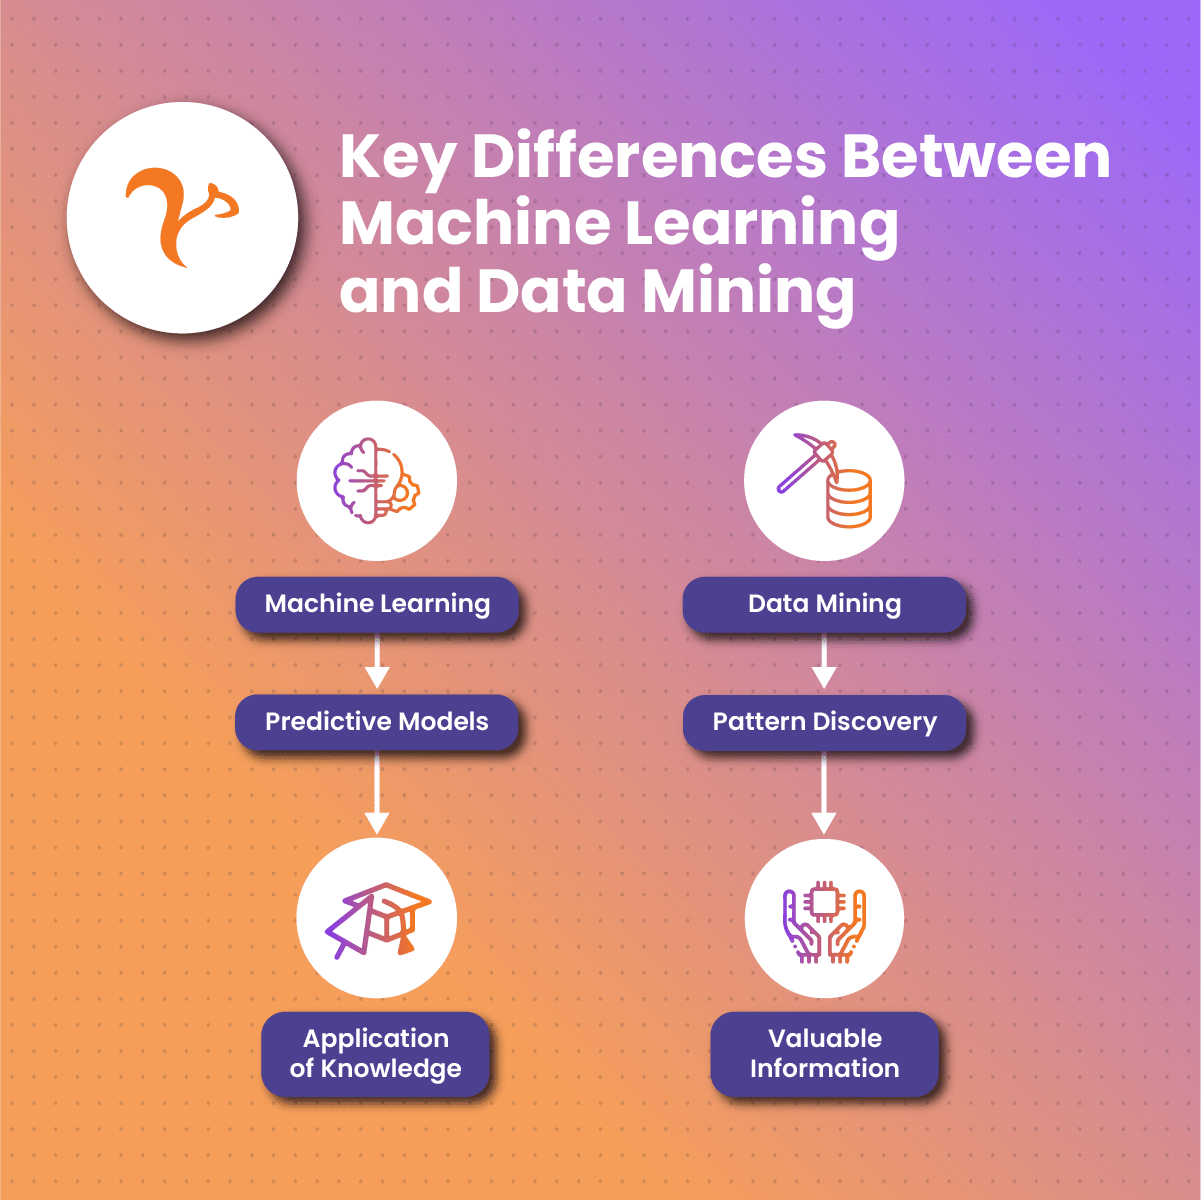 Key Differences Between Machine Learning and Data Mining